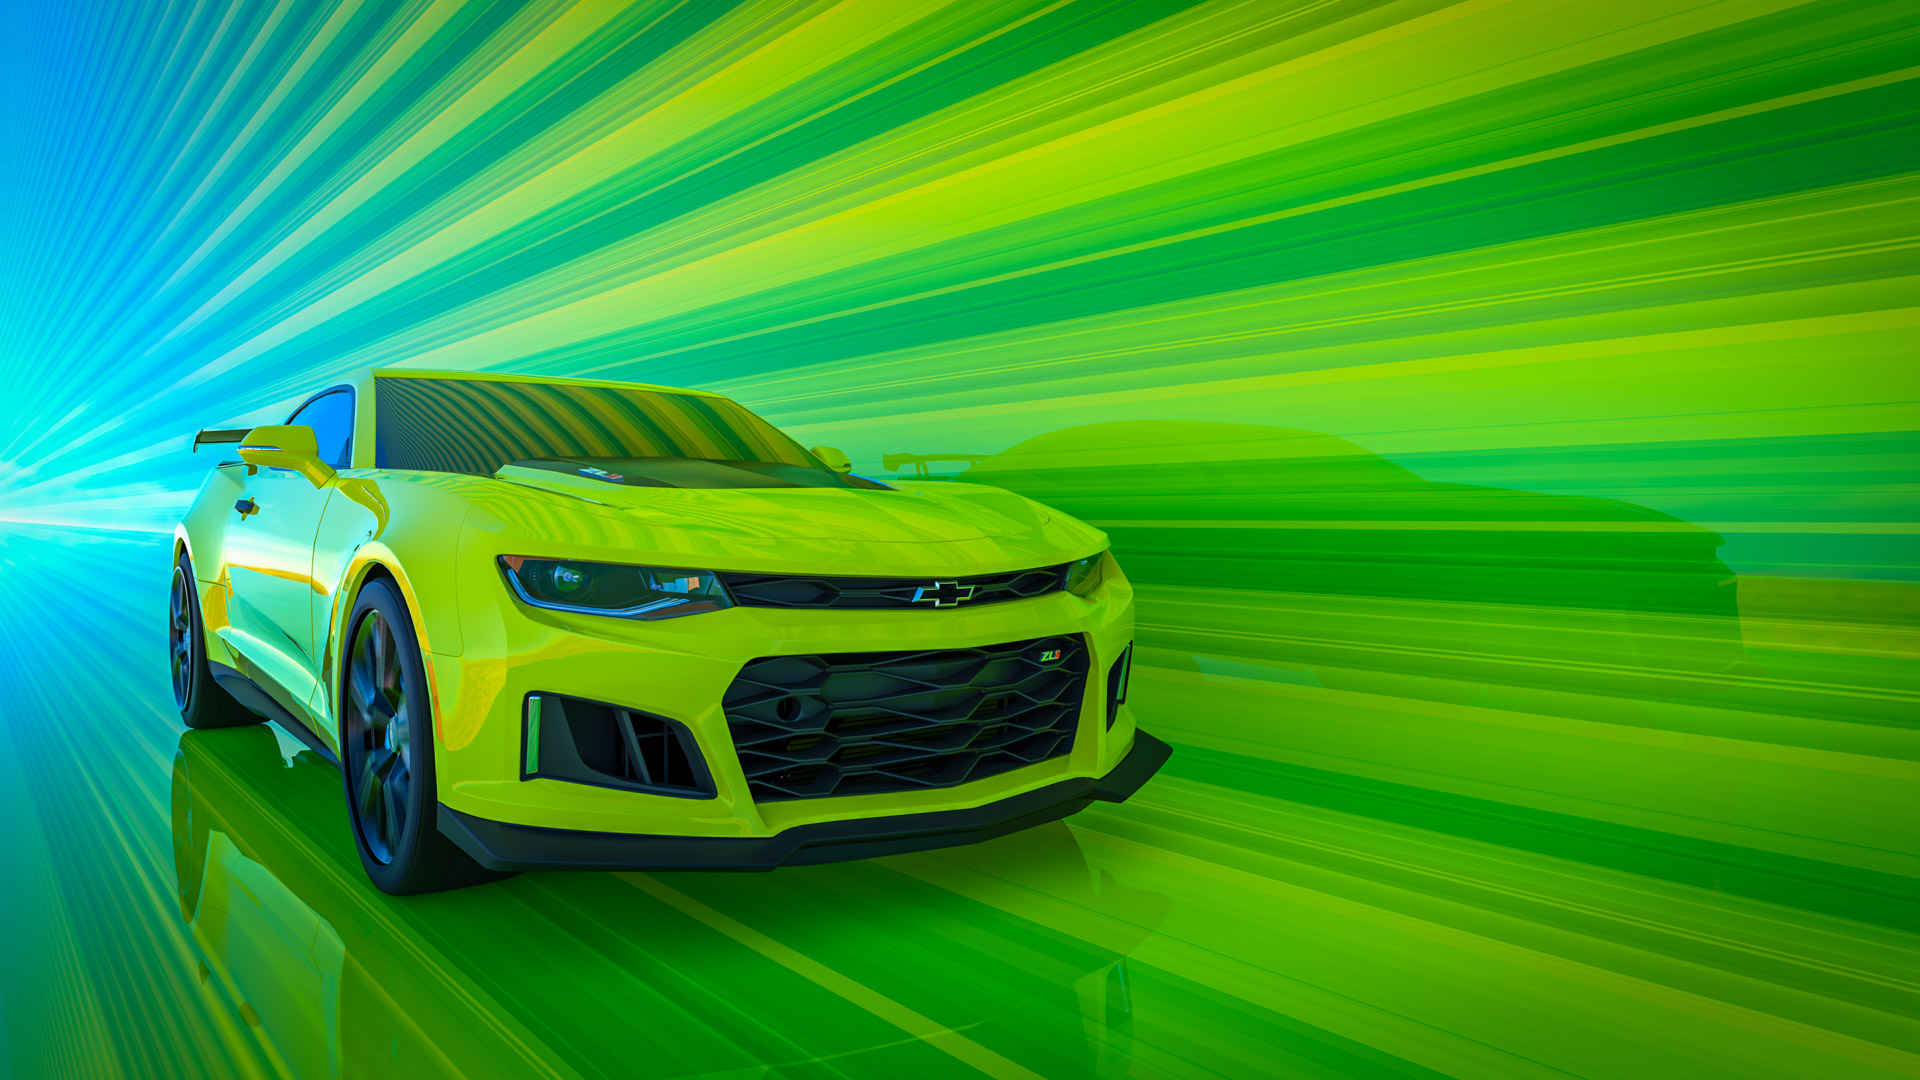 Feel the power of the Chevrolet Camaro with our 1080p muscle car wallpaper, capturing the essence of American automotive design.